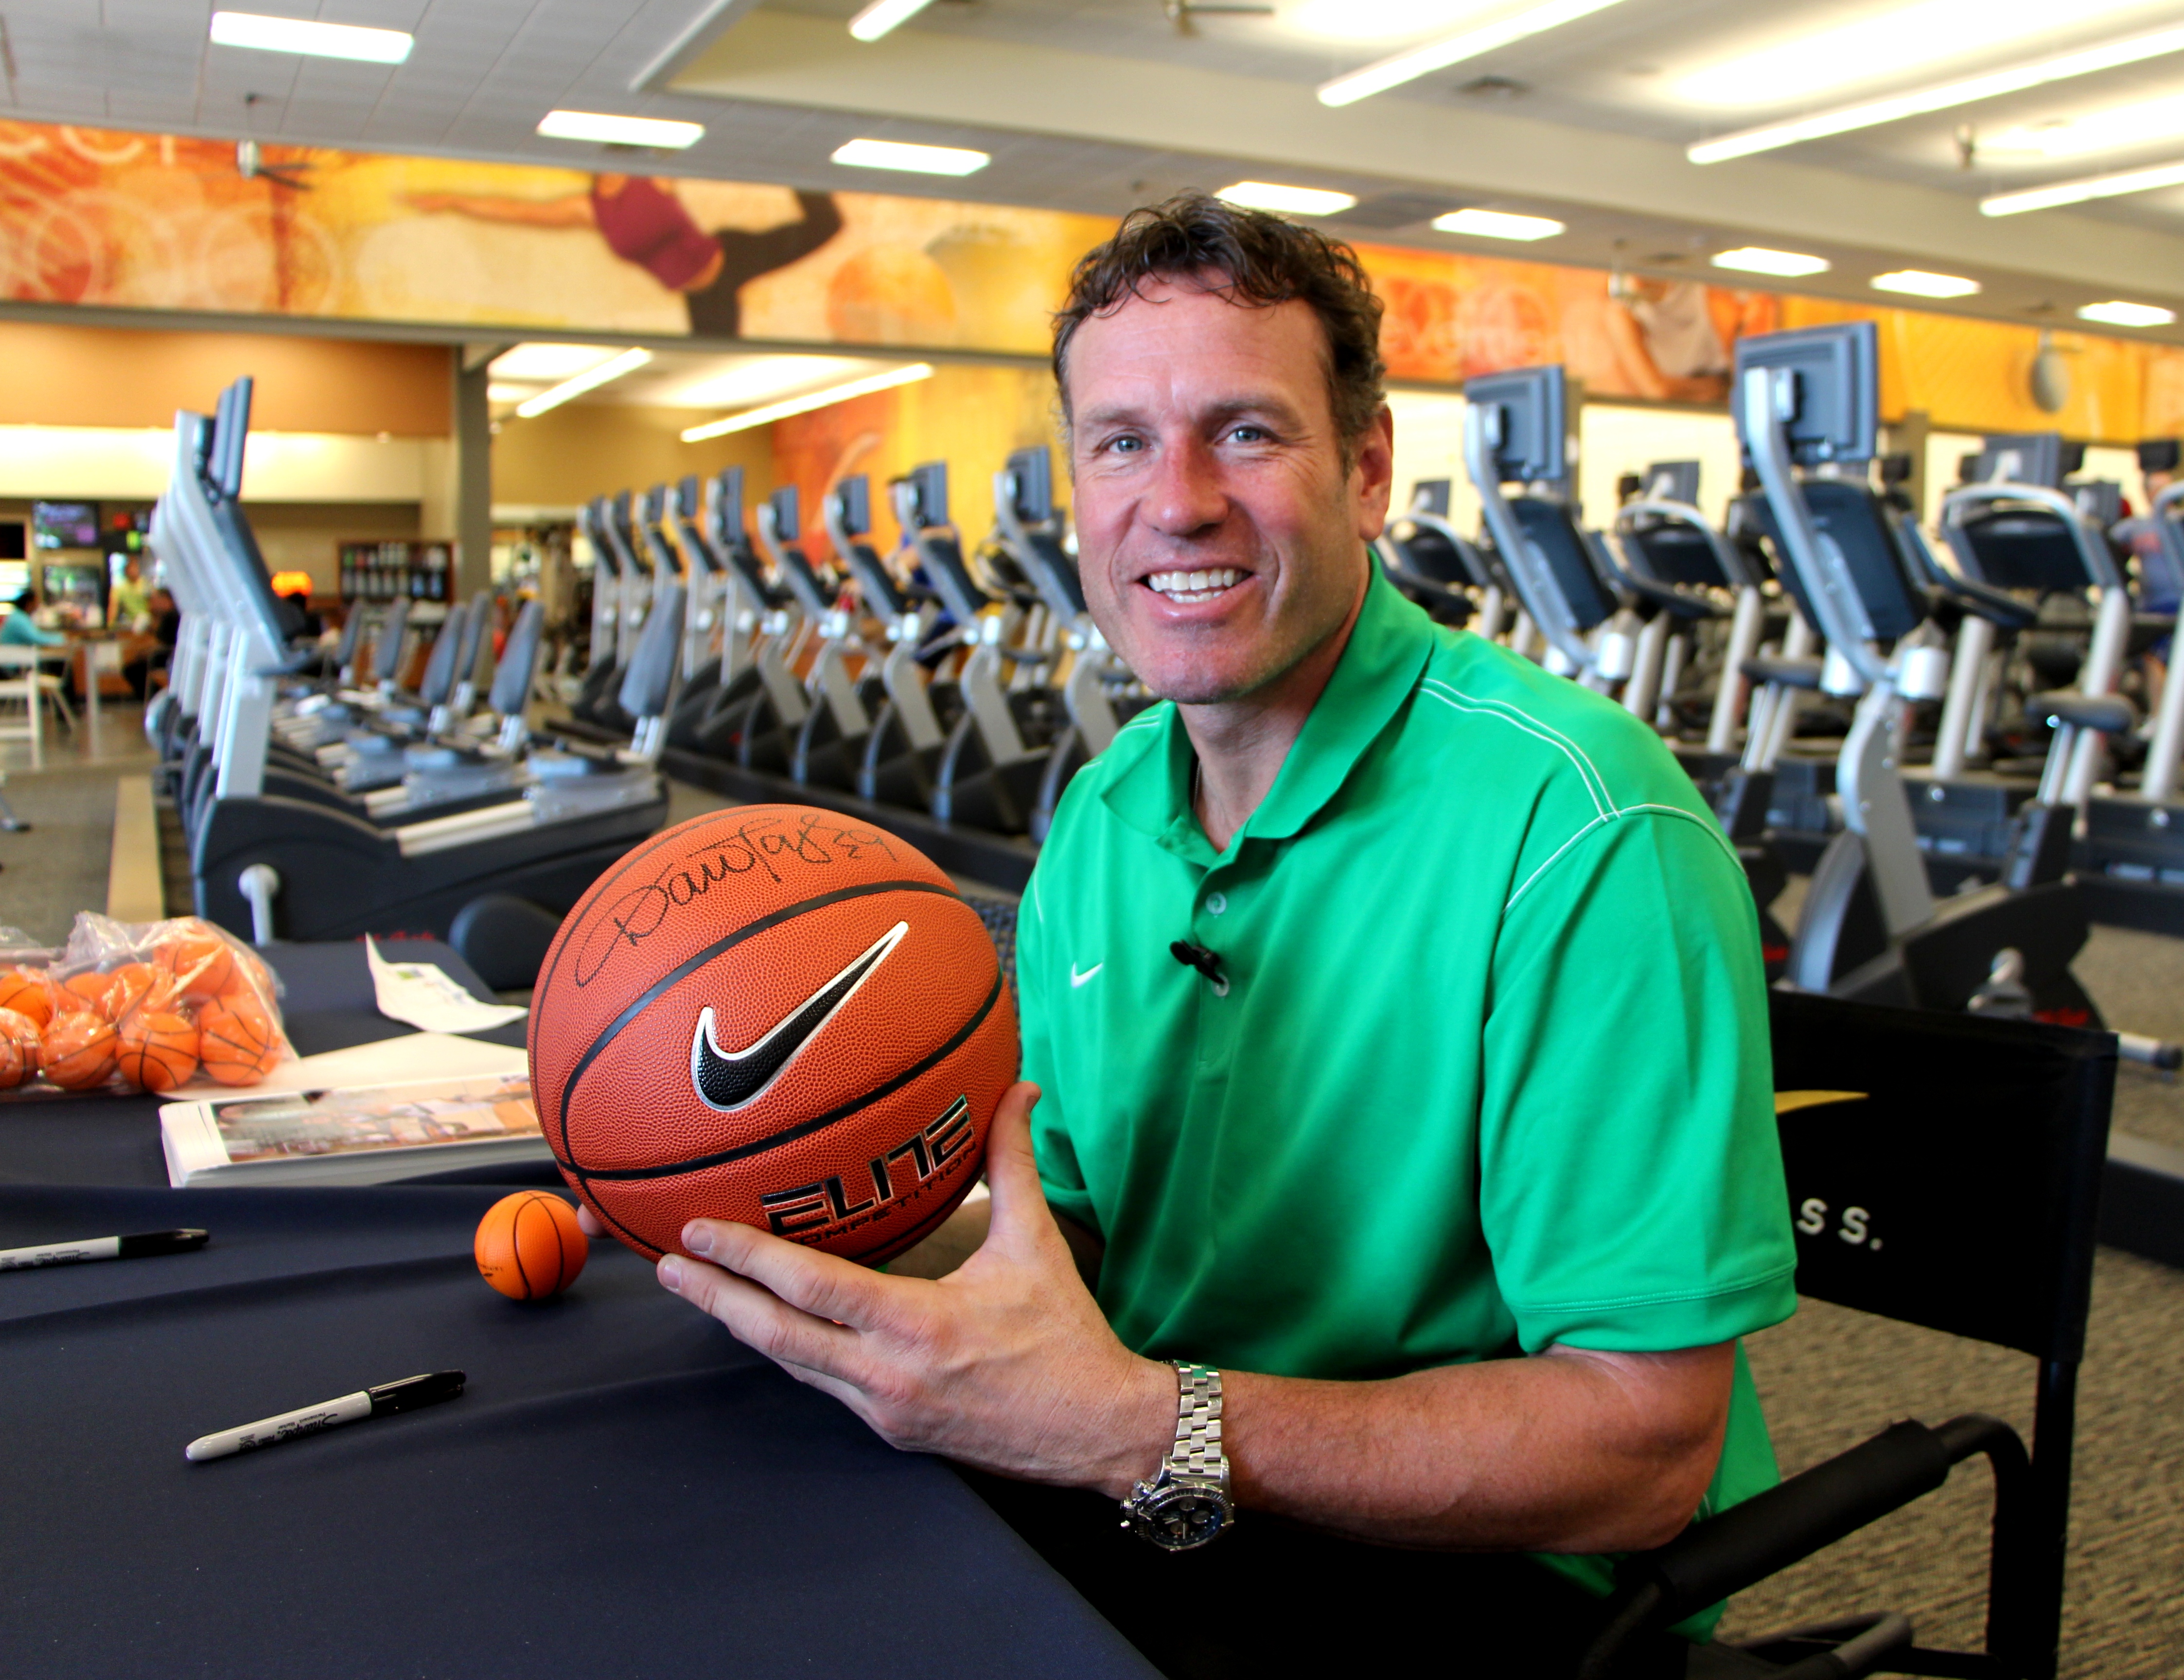 Phoenix Suns legend Dan Majerle autographs a basketball for the LIVING HEALTHY give away contest